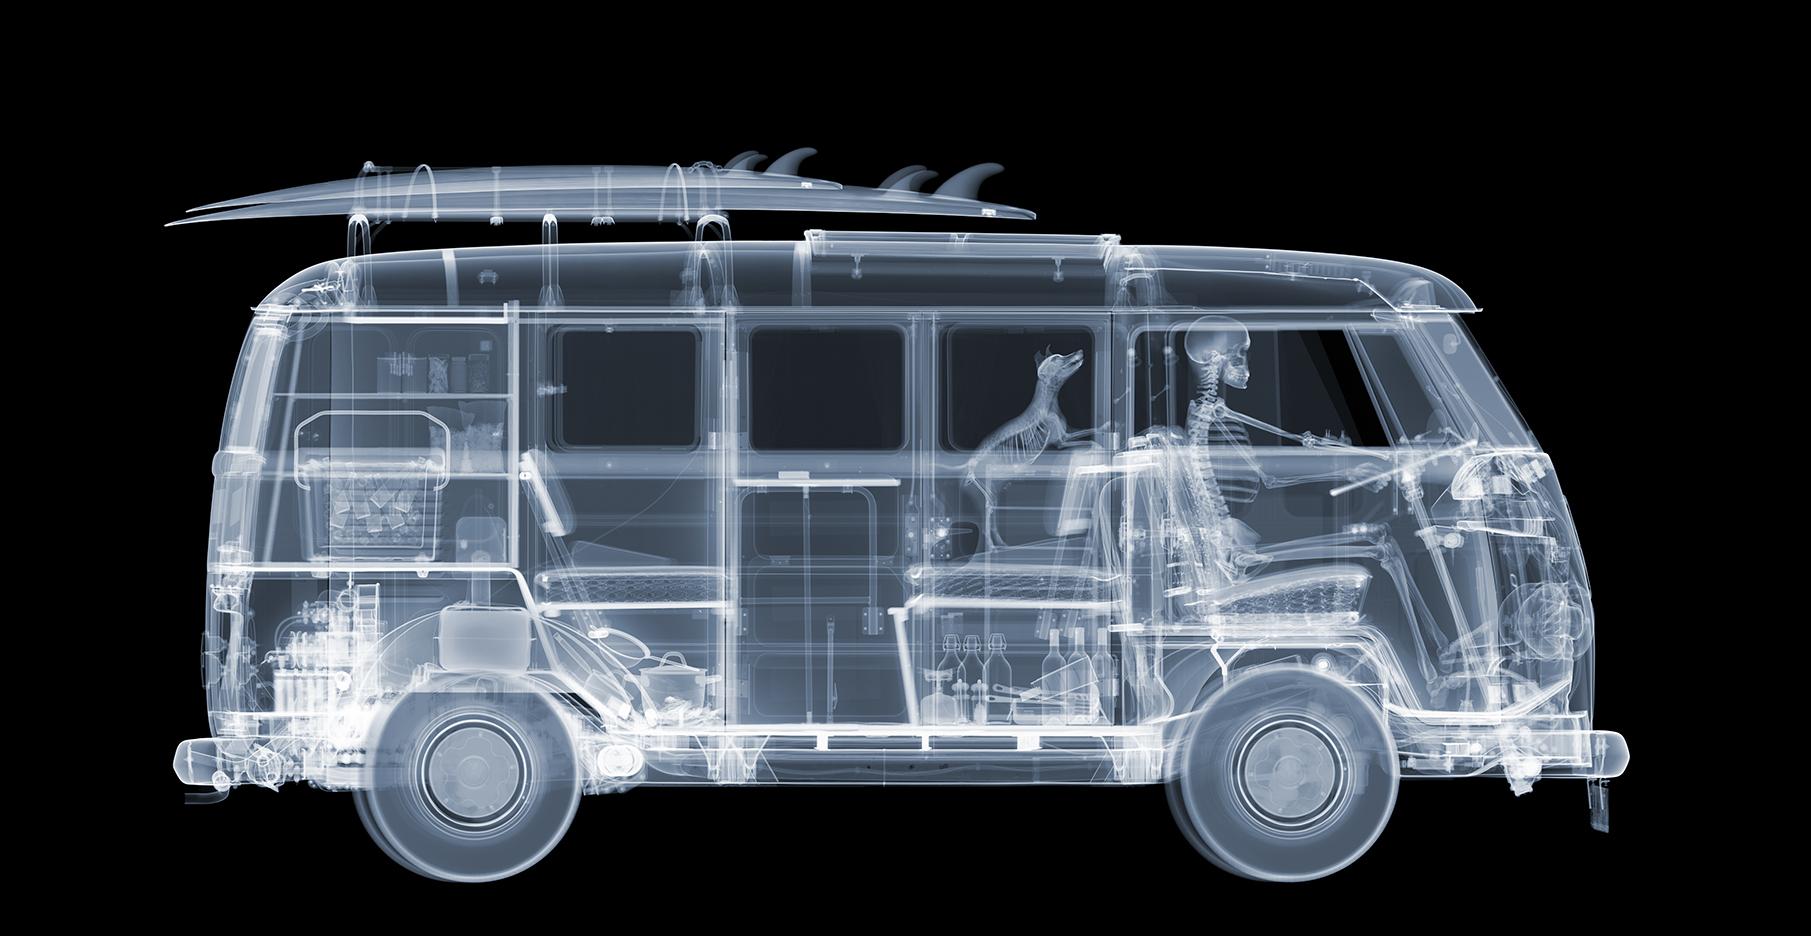 Camper Van on the Road / X-Ray-Druck / Fotografie / Radiographic Imaging  – Photograph von Nick Veasey